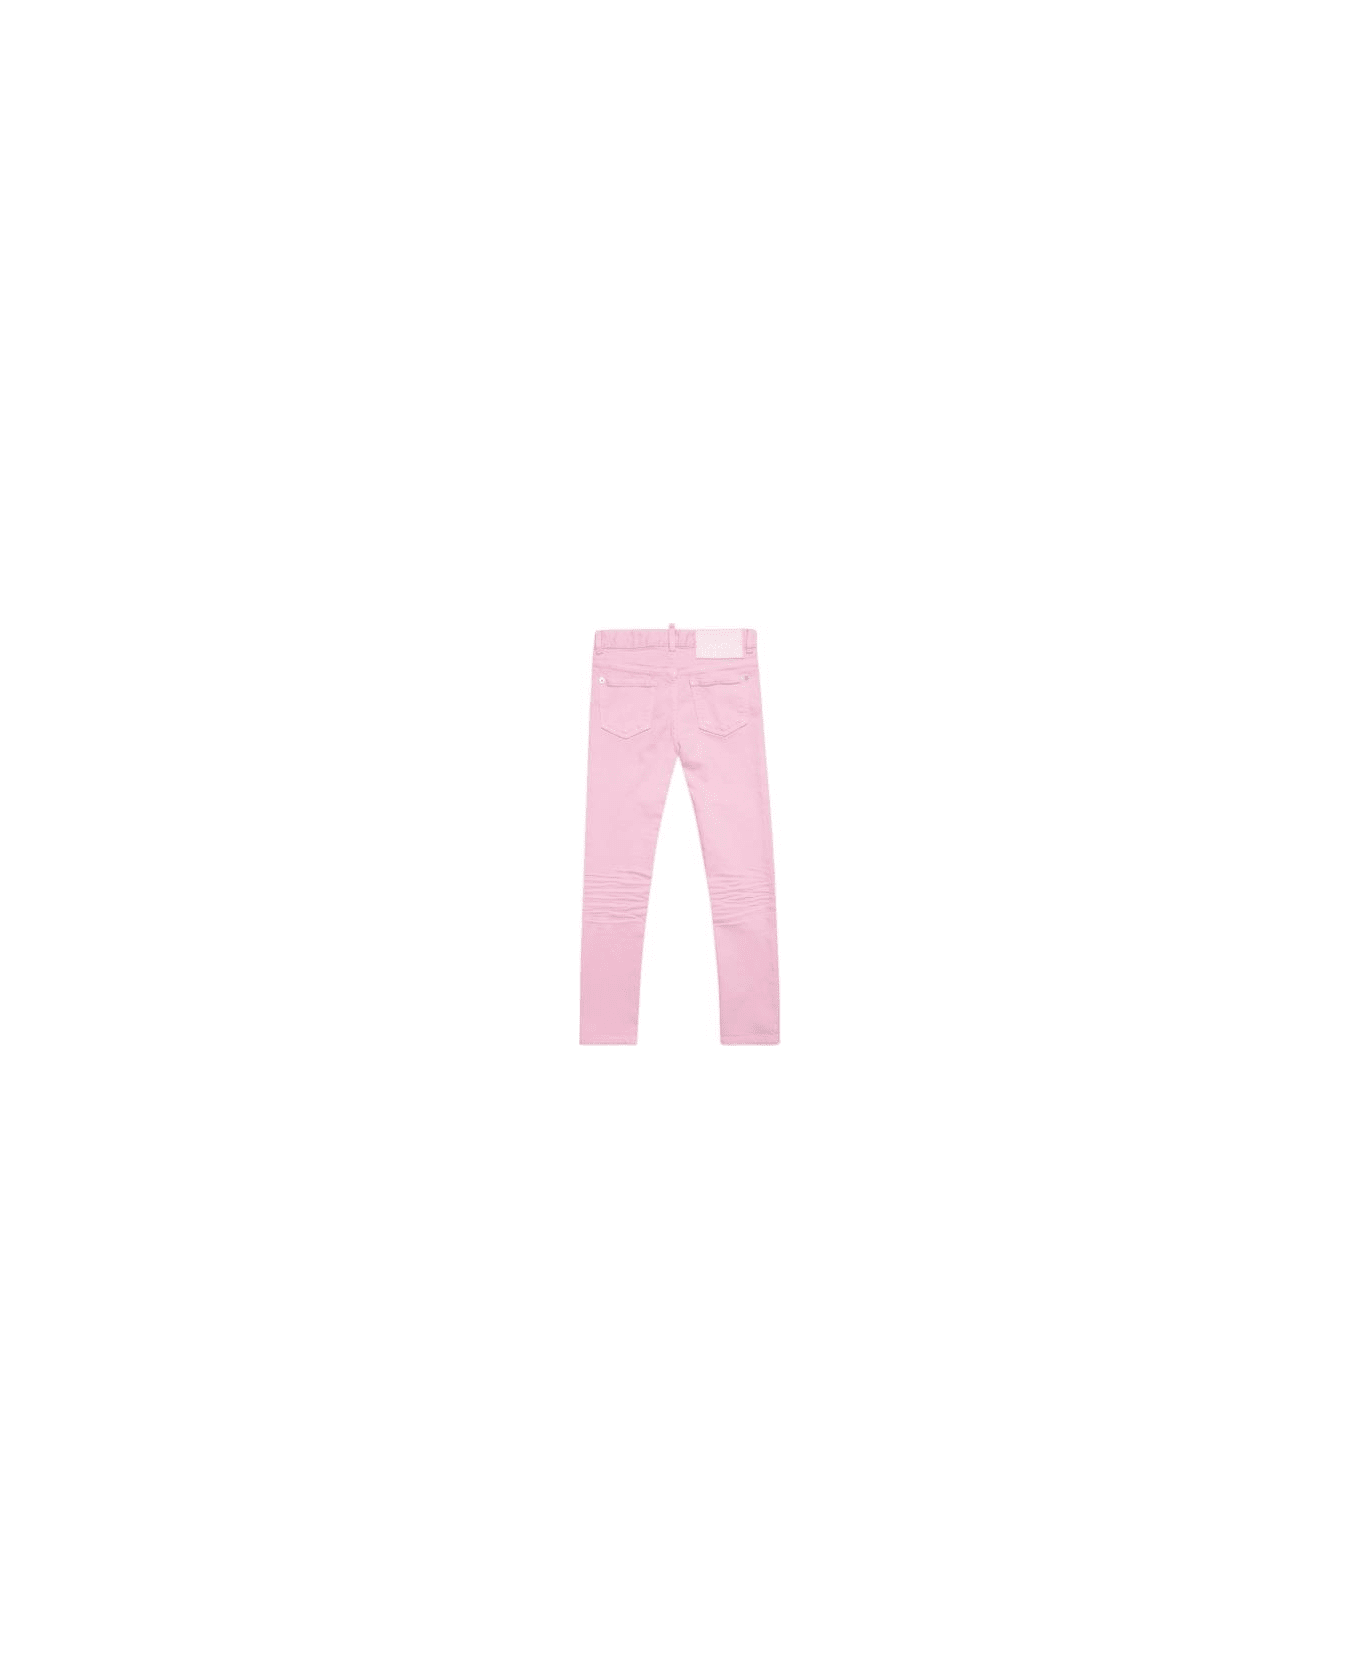 Dsquared2 Twiggy Straight Jeans - Pink ボトムス